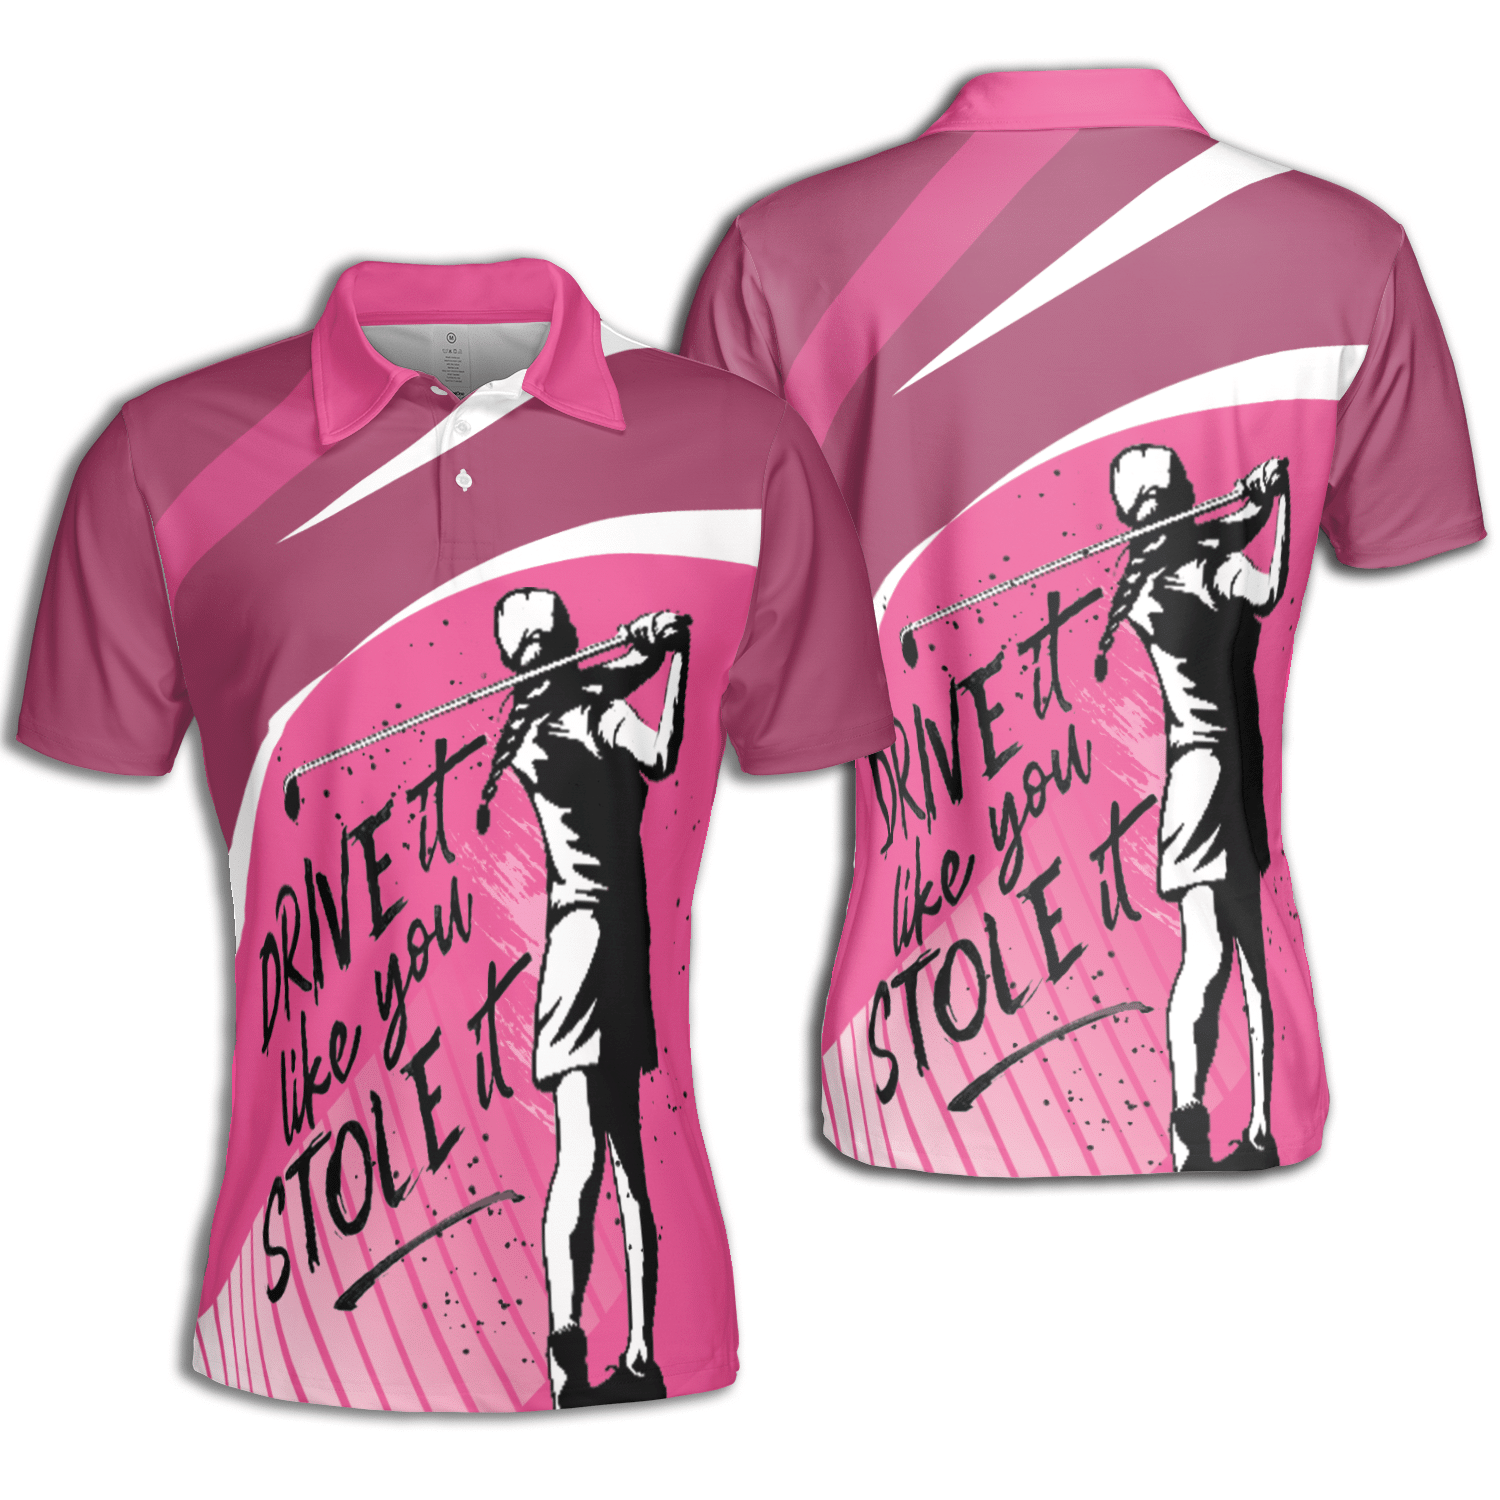 Golf Drive It Like You Stole It For Women Short Sleeve Woman Polo Shirt